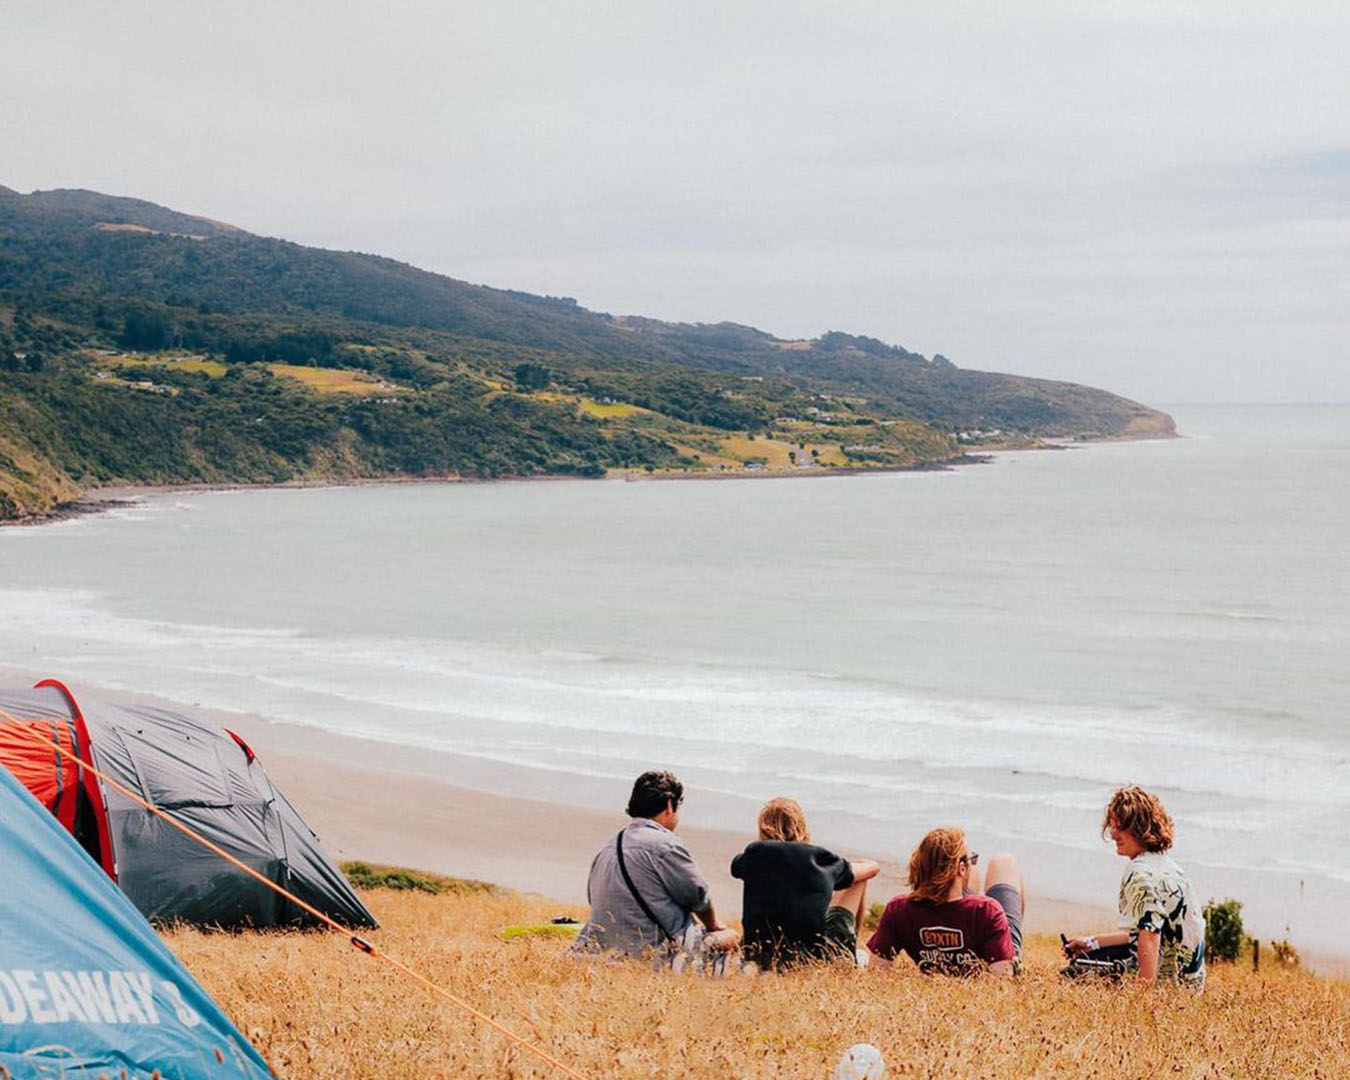 Tents in the foreground, people reclining on a sand dune and the ocean in the background atSoundsplash festival 